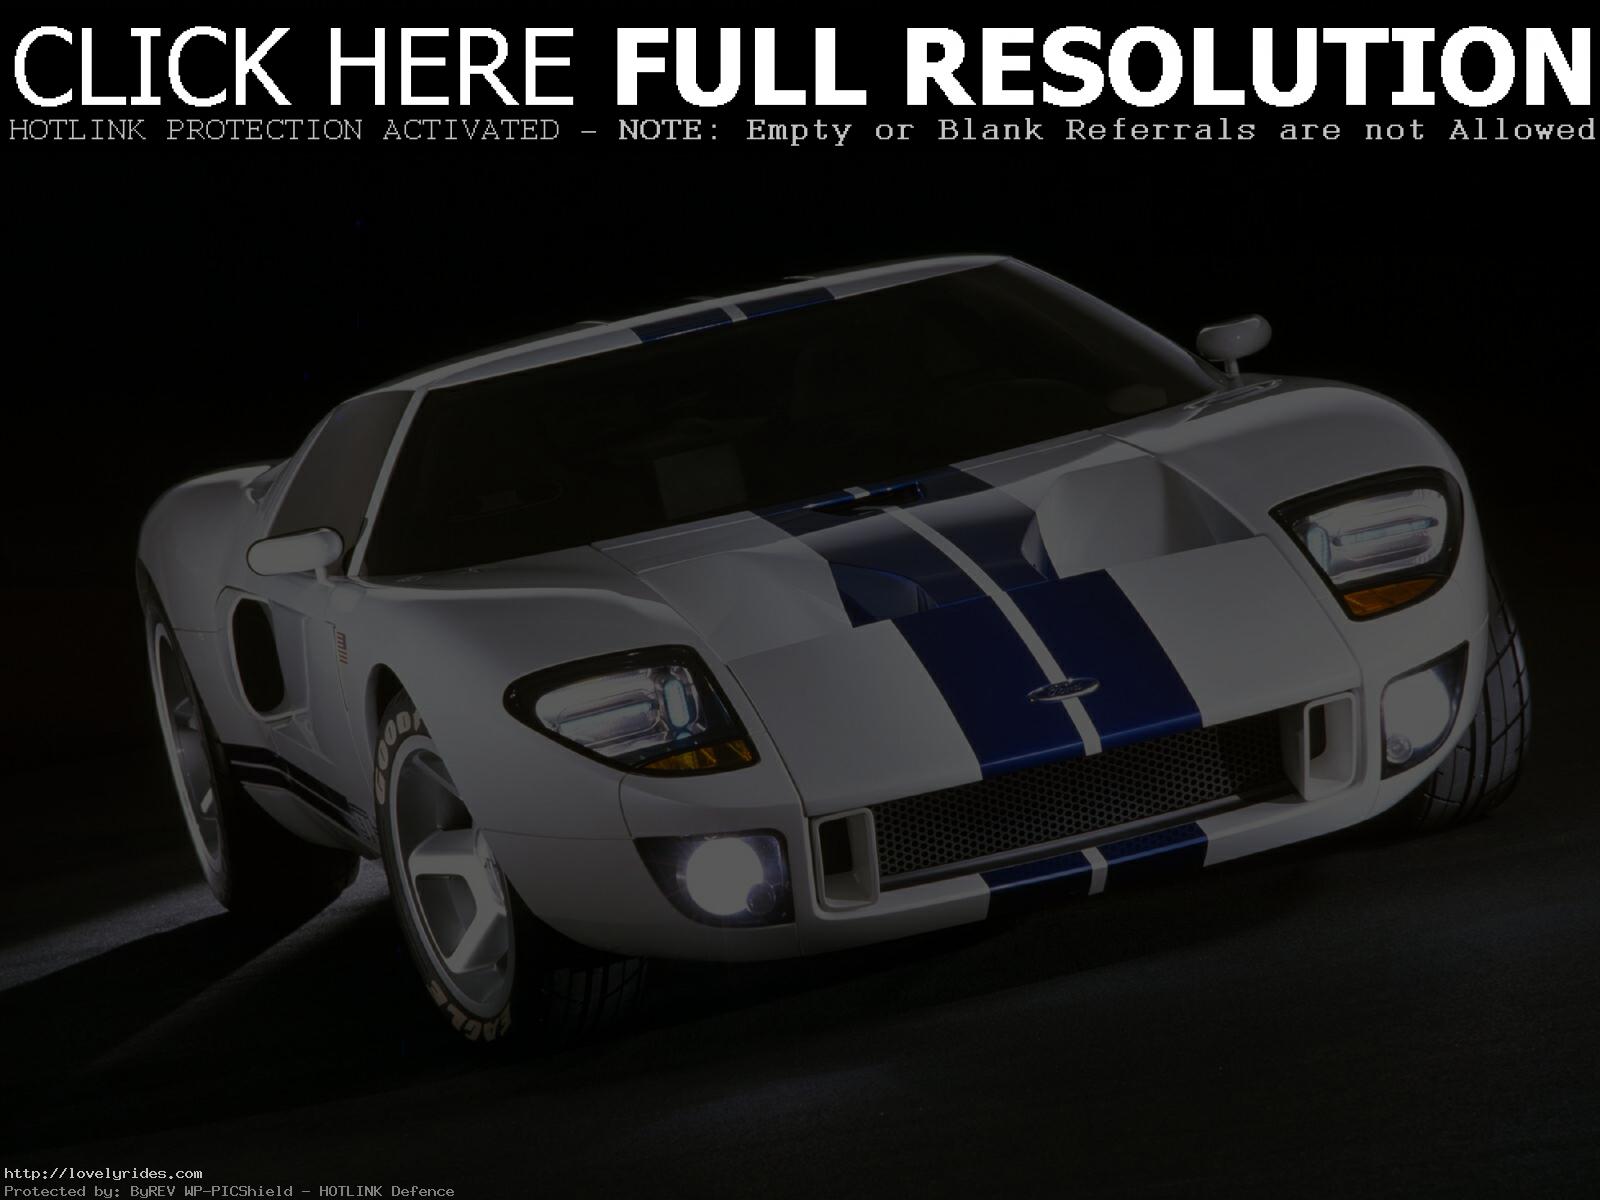 White Ford GT40 HD Wallpaper | Latest Car Wallpapers